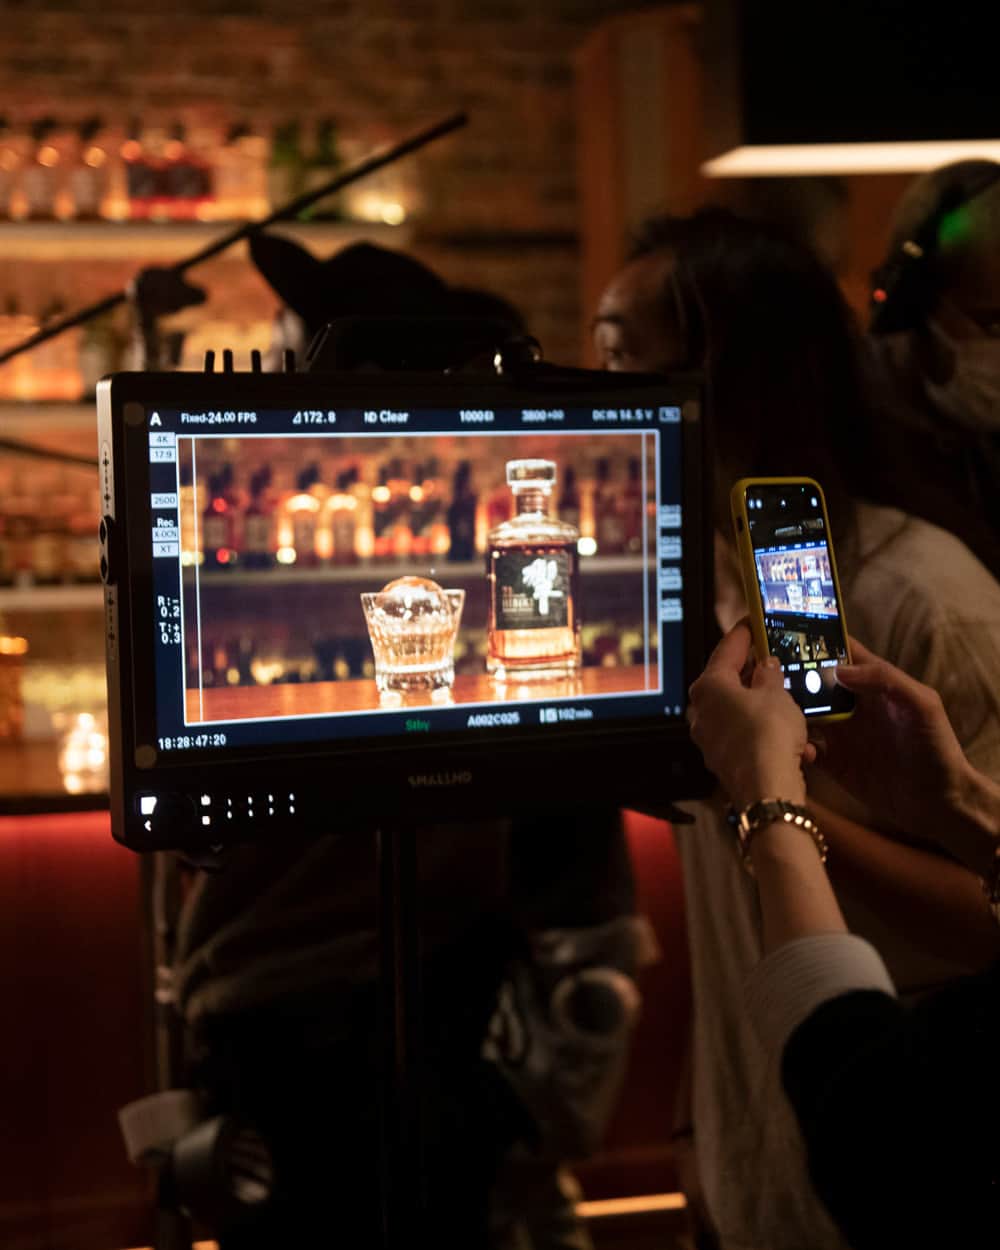 Suntory Whiskyのインスタグラム：「Take a Behind The Scenes peek at the making of "Suntory Time". A tribute celebrating Suntory’s 100 year anniversary with director Sofia Coppola, actor Keanu Reeves, and a cast of special guests. Visit us through the link in bio to watch the full tribute film.⁣ ⁣ #SuntoryTime #Suntory100 #BTS」